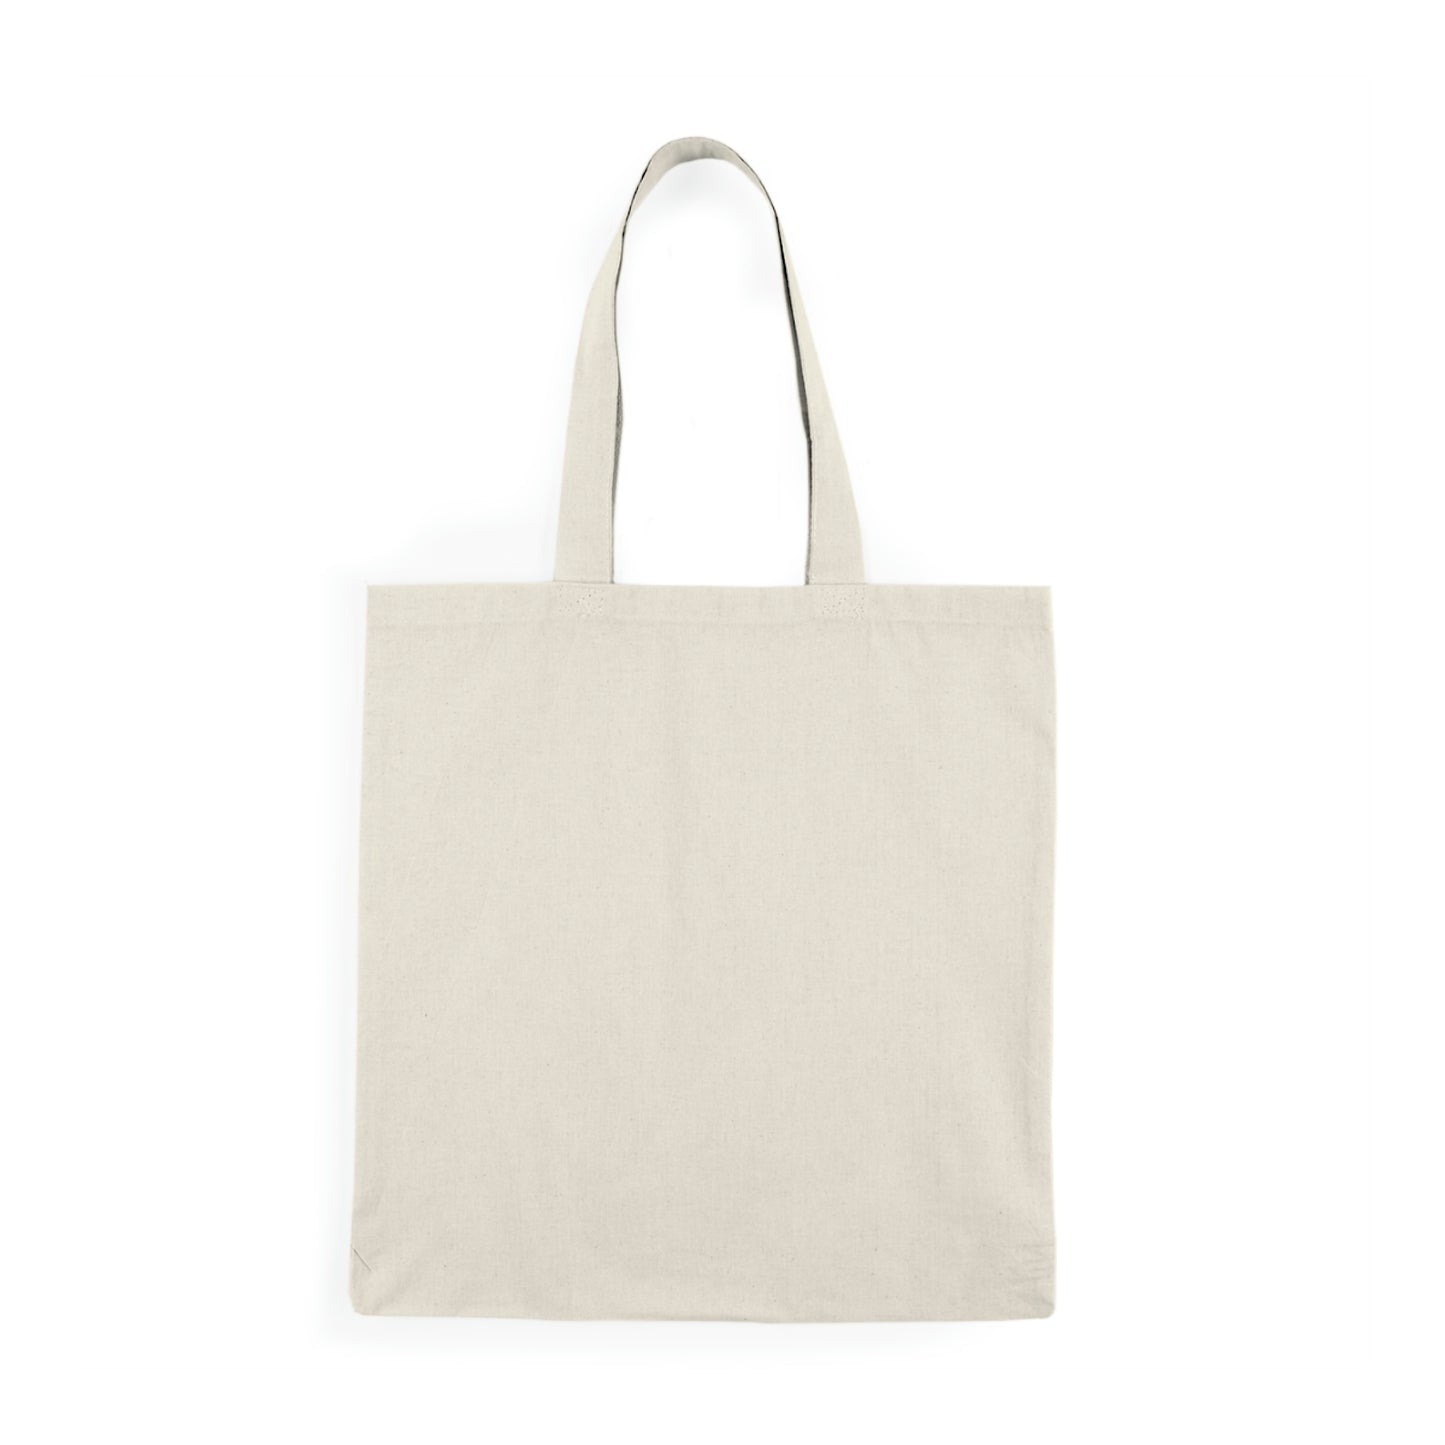 You Got This Girlfriend Tote Bag